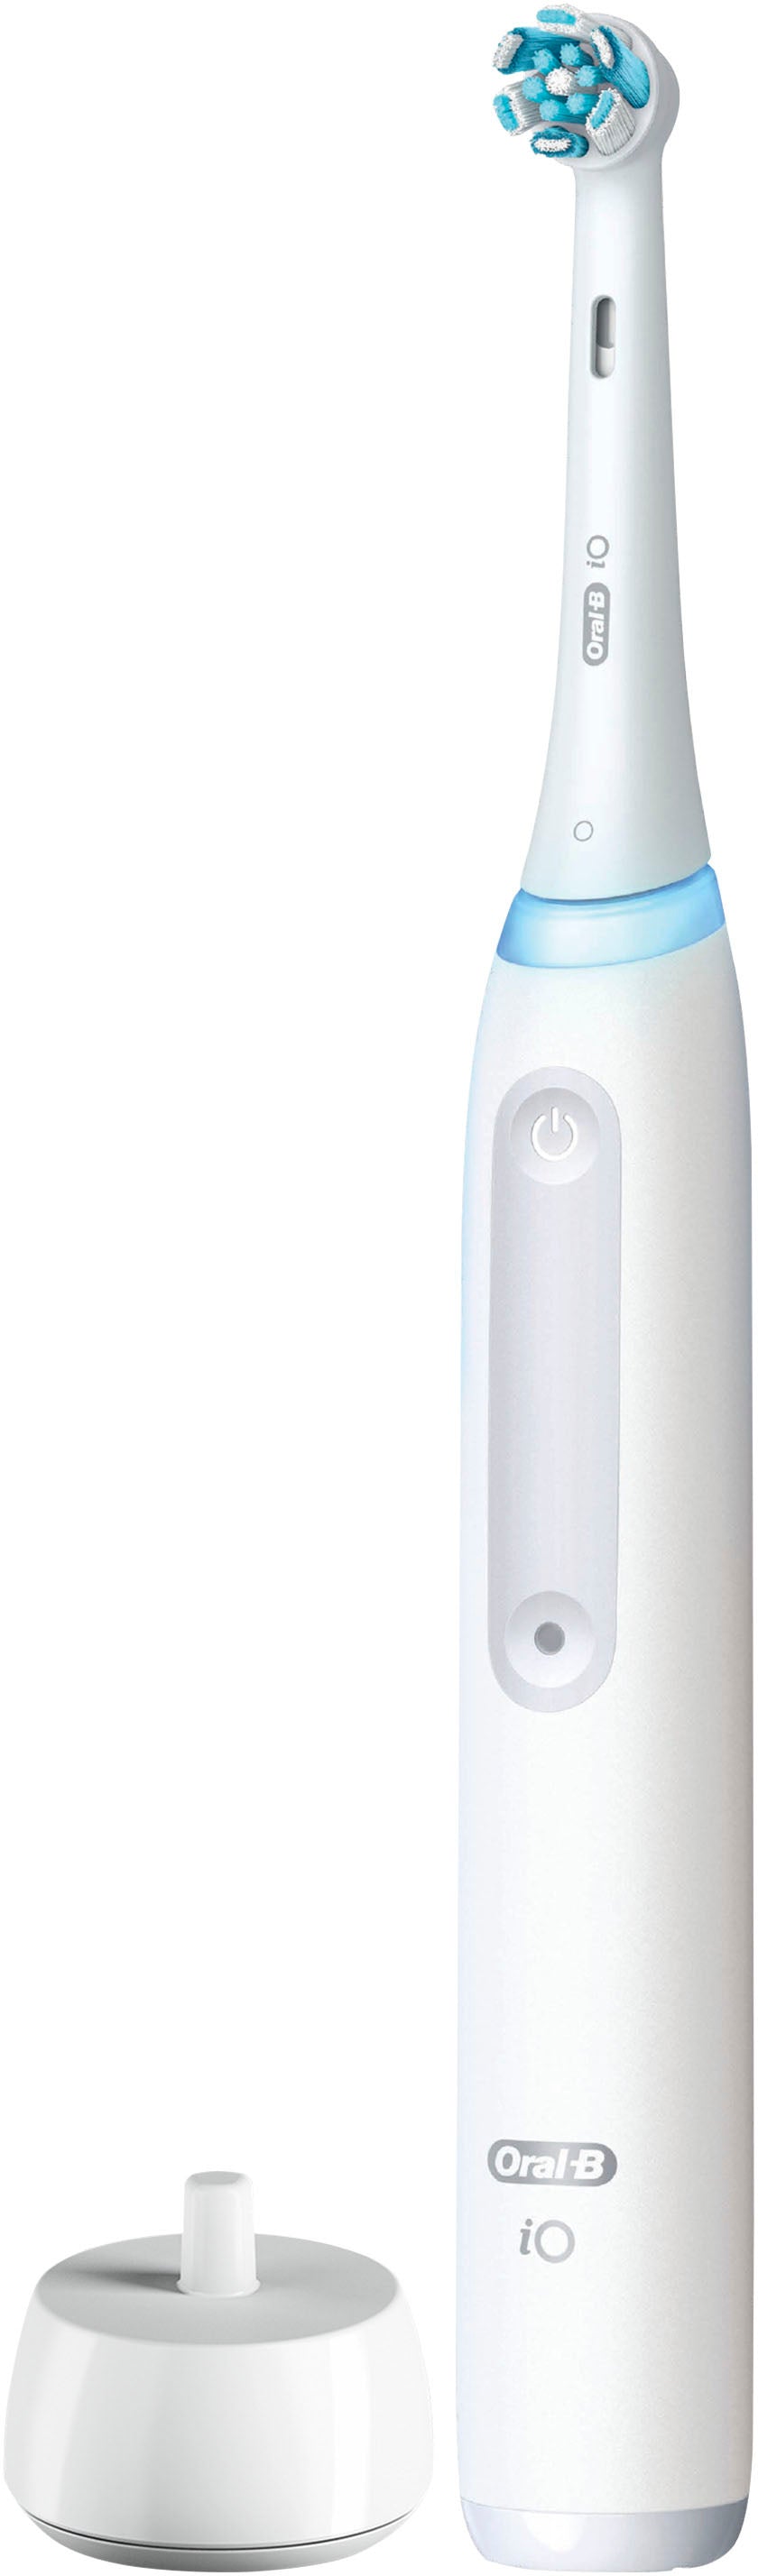 Oral-B - iO Series 3 Electric Toothbrush with (1) Brush Head, Rechargeable, White - White_7